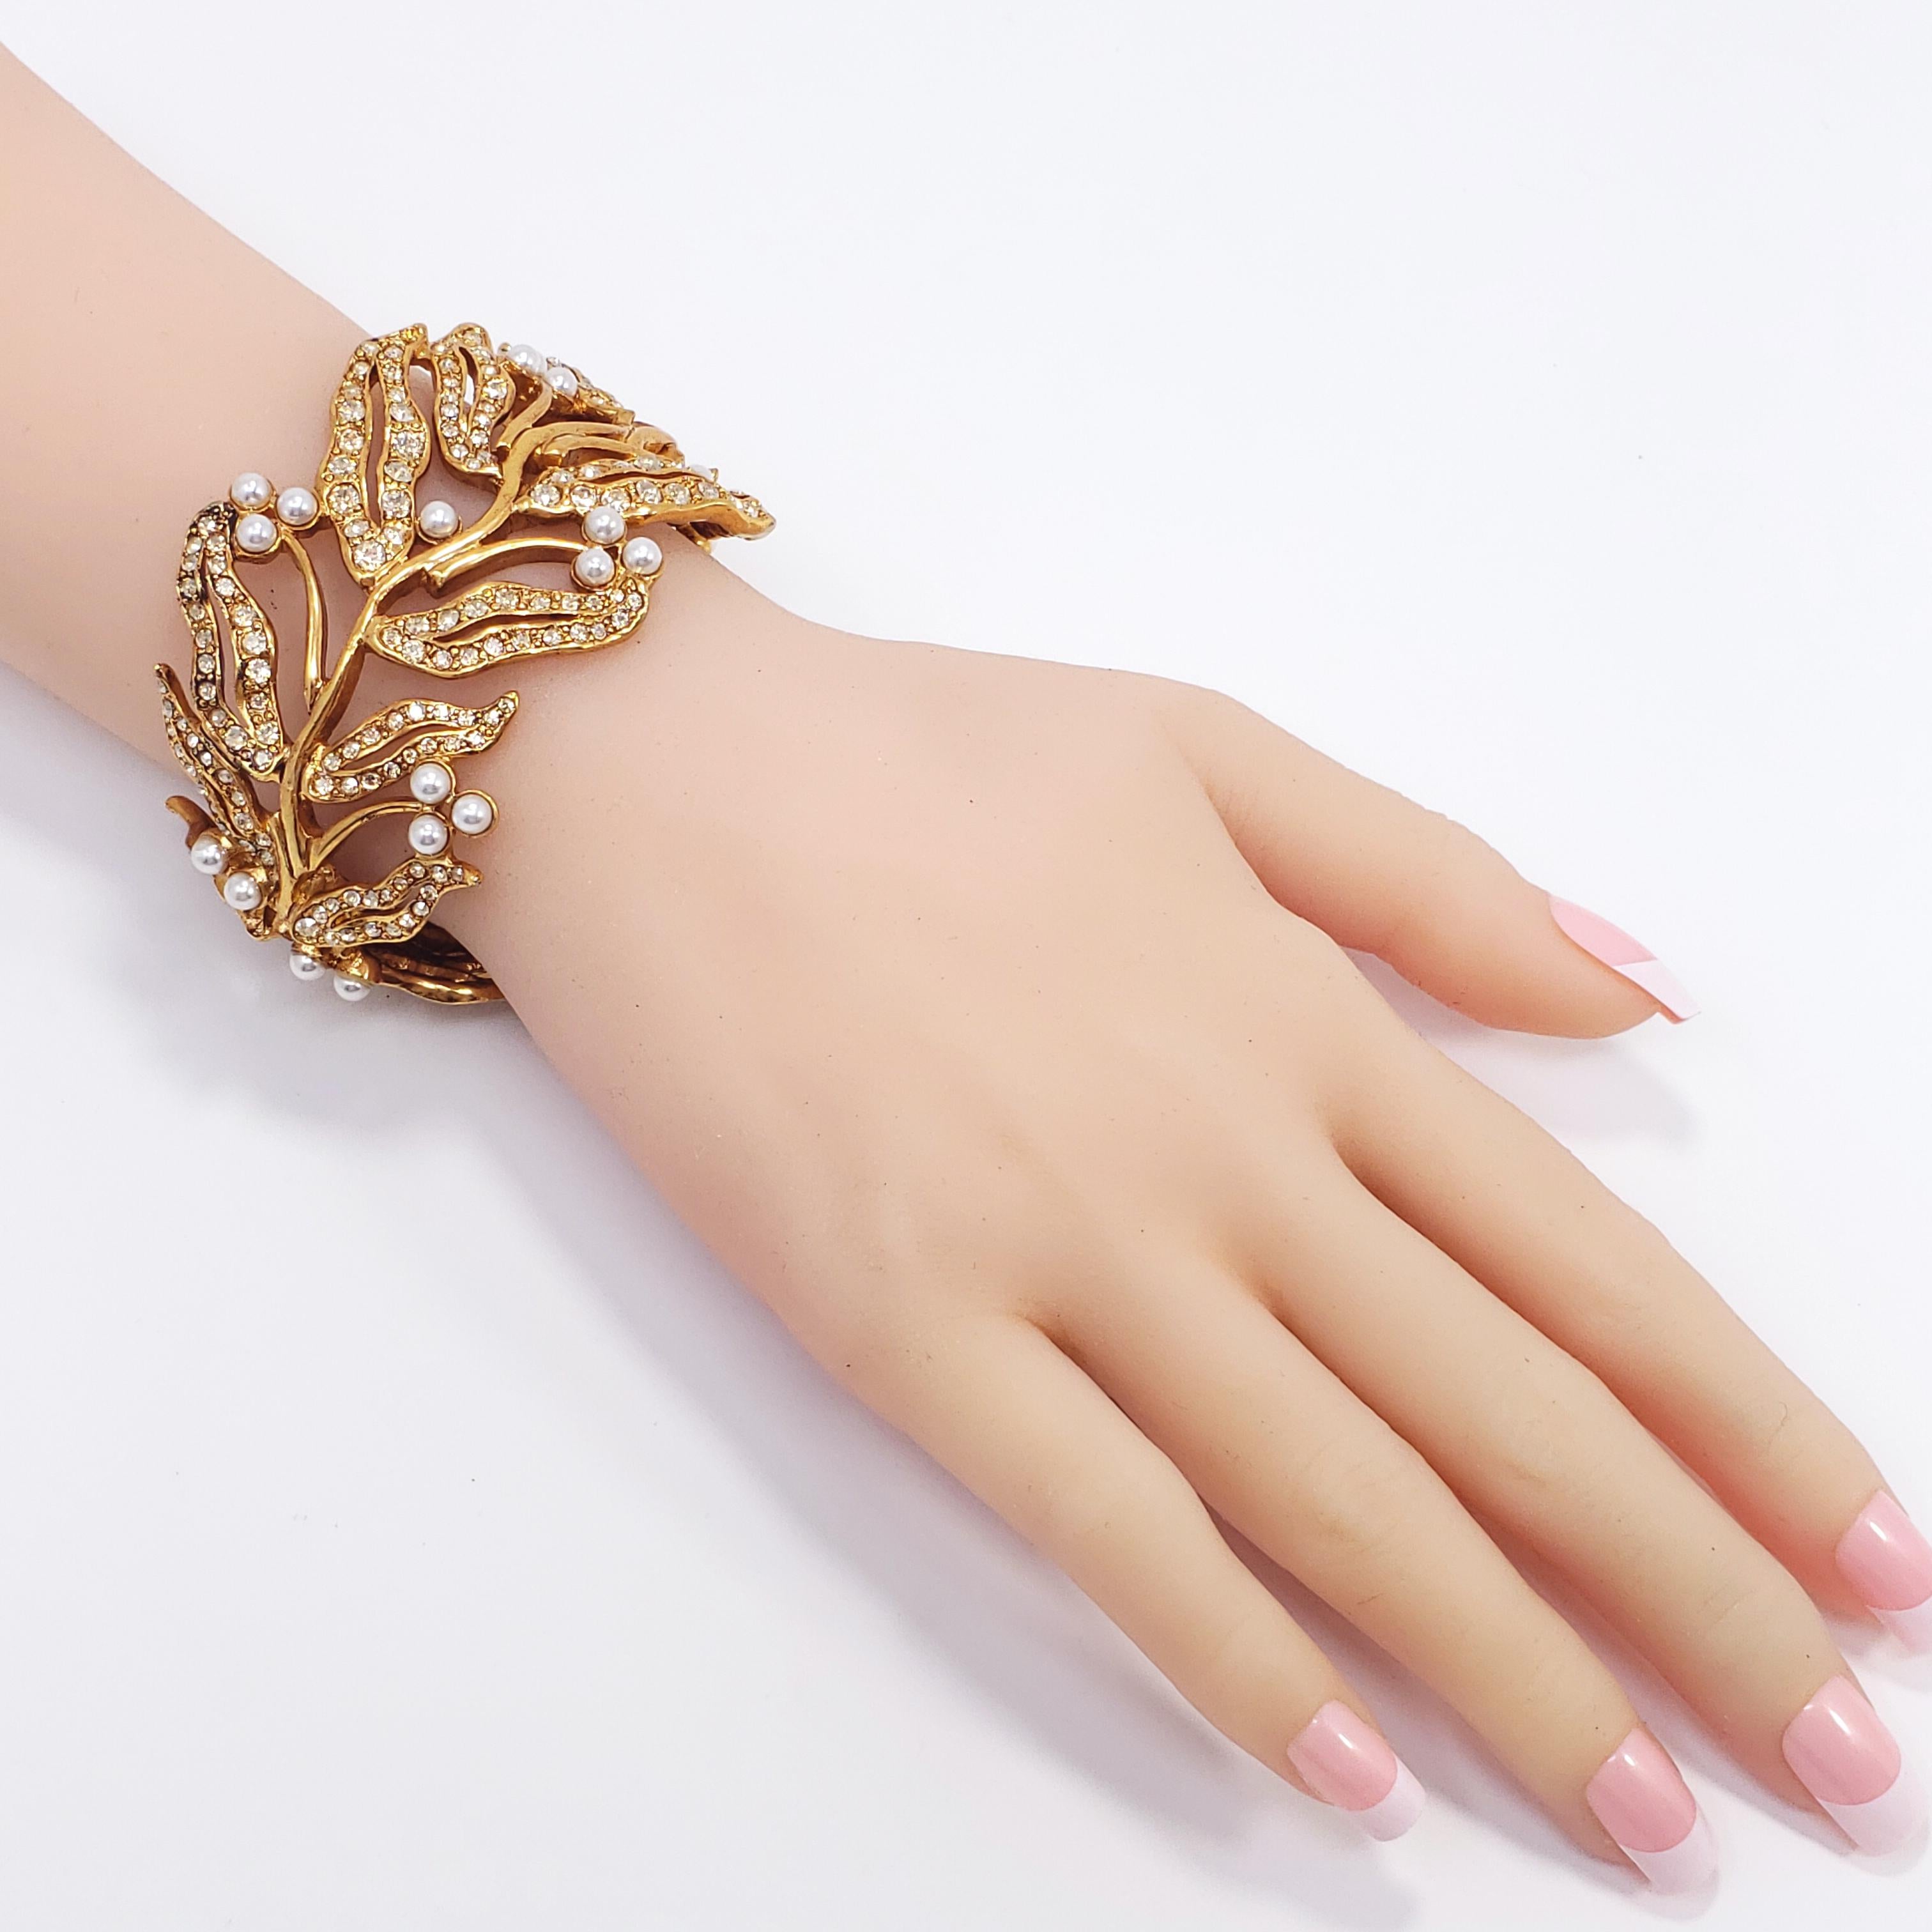 An exquisite hinged cuff bracelet by Oscar de la Renta. Features bamboo leaf motifs decorated with brilliant crystals and faux pearls. Hinged, with magnetic closure.

Inner diameter at widest part: 5.9 cm
Inner circumference: 16.75 cm
Height: 4.2 cm